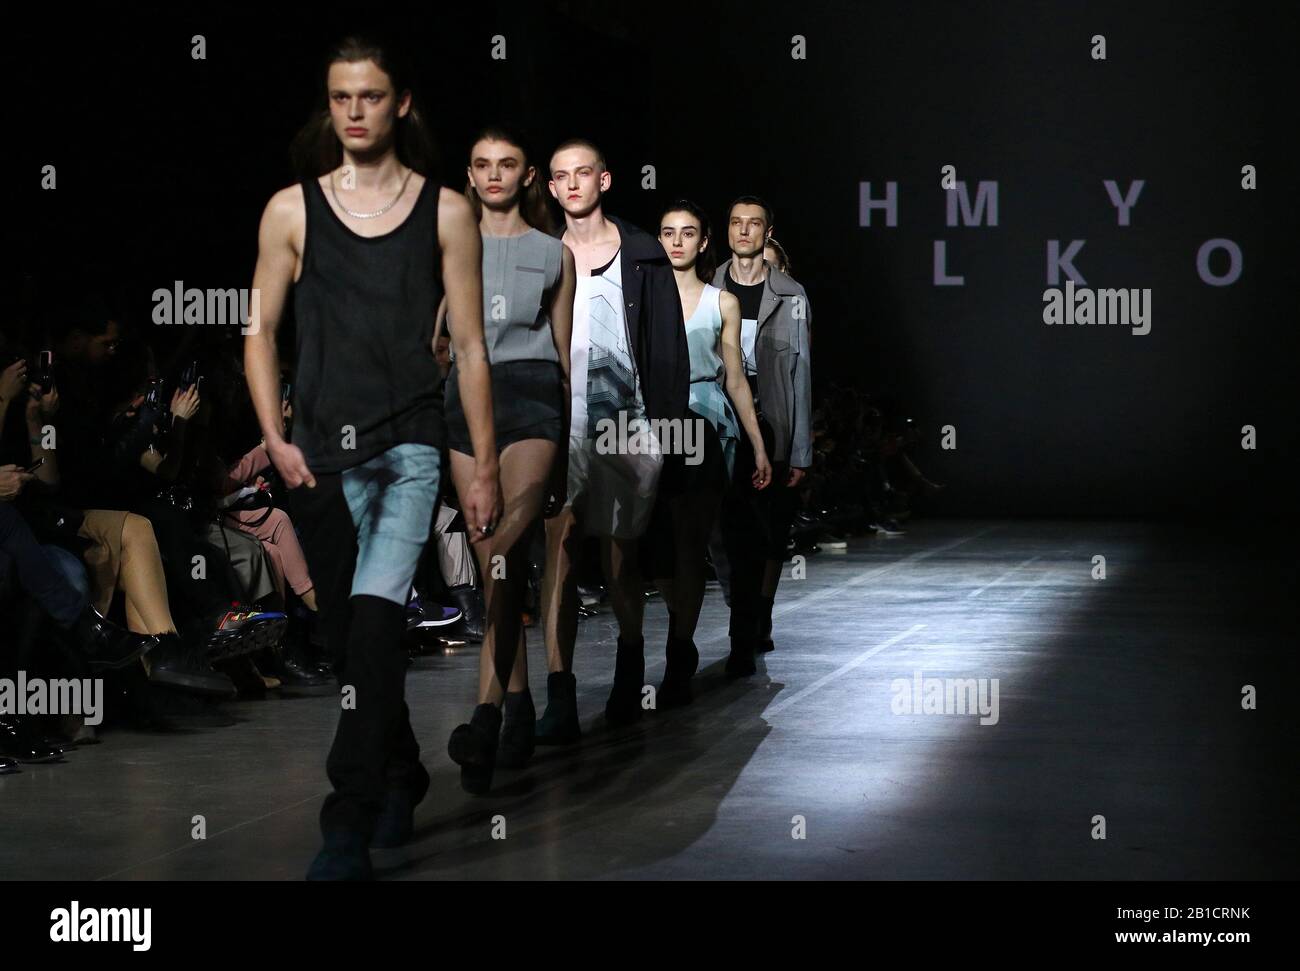 Kyiv, Ukraine - February 5, 2020: Models present a collection of clothes by designer HMYLKO during the 46th Ukrainian Fashion Week season Fall/Winter 2020/21 at Mystetskyi Arsenal in Kyiv Stock Photo